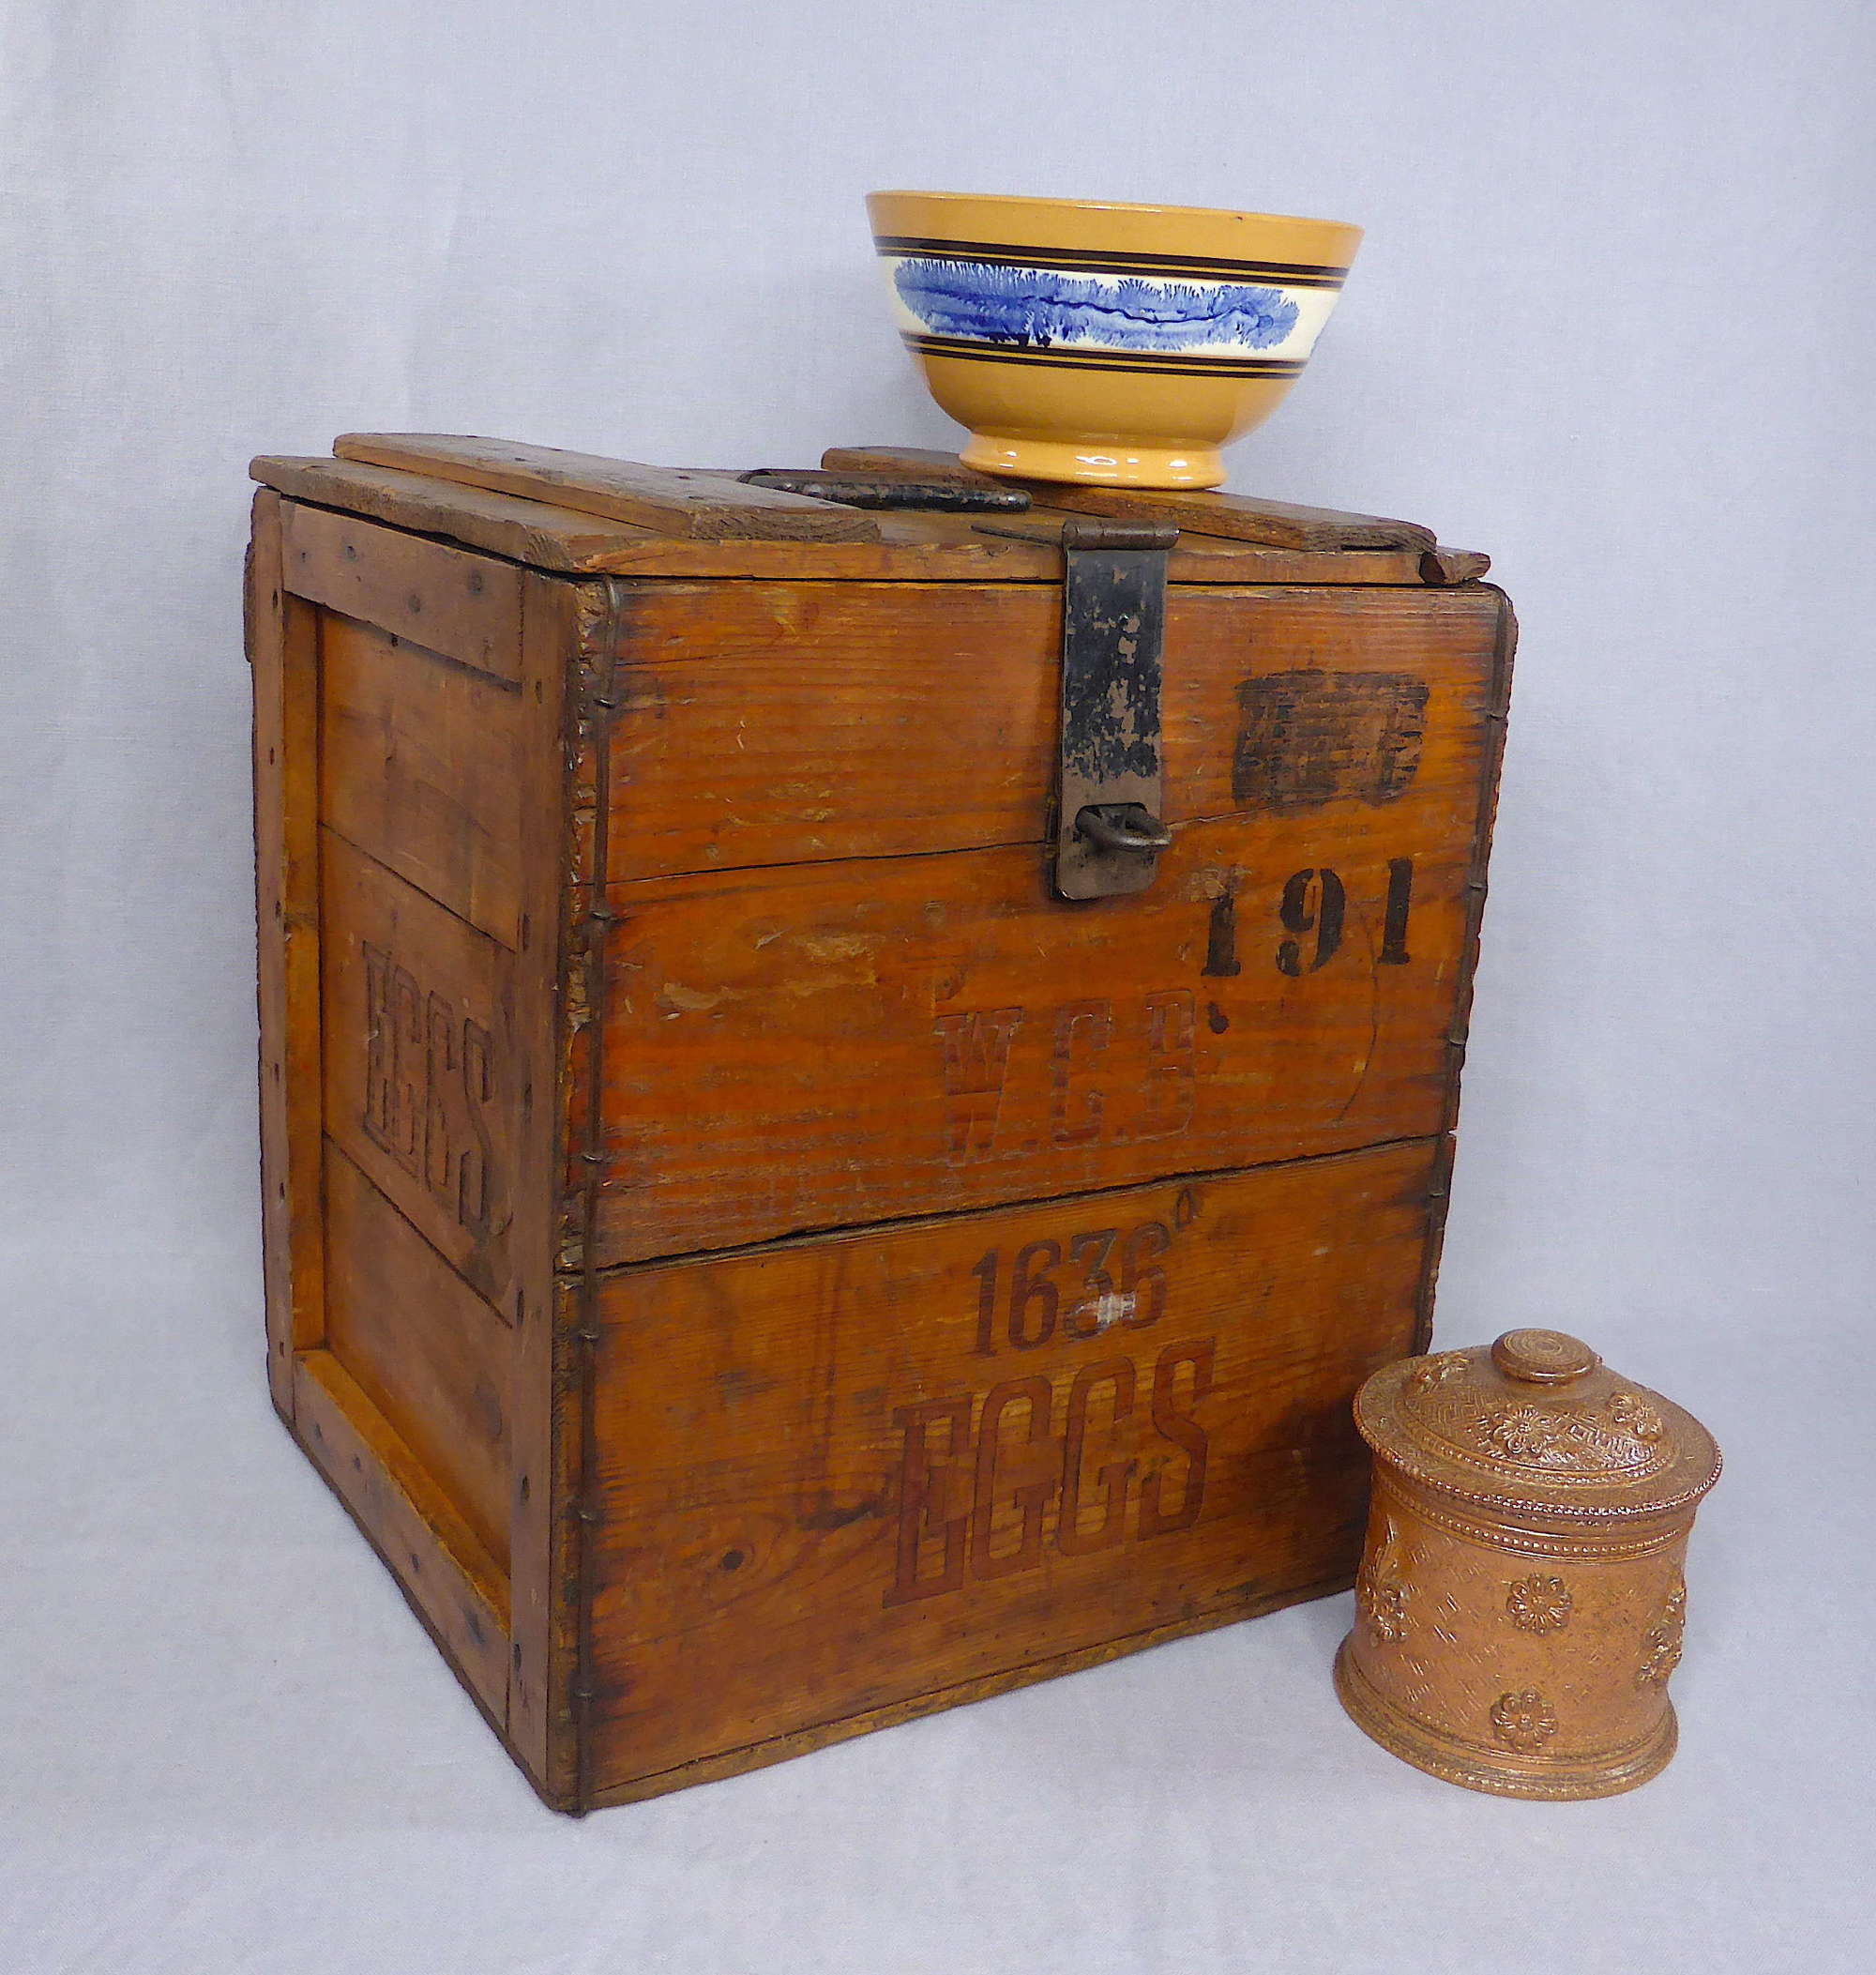 Large wooden egg crate